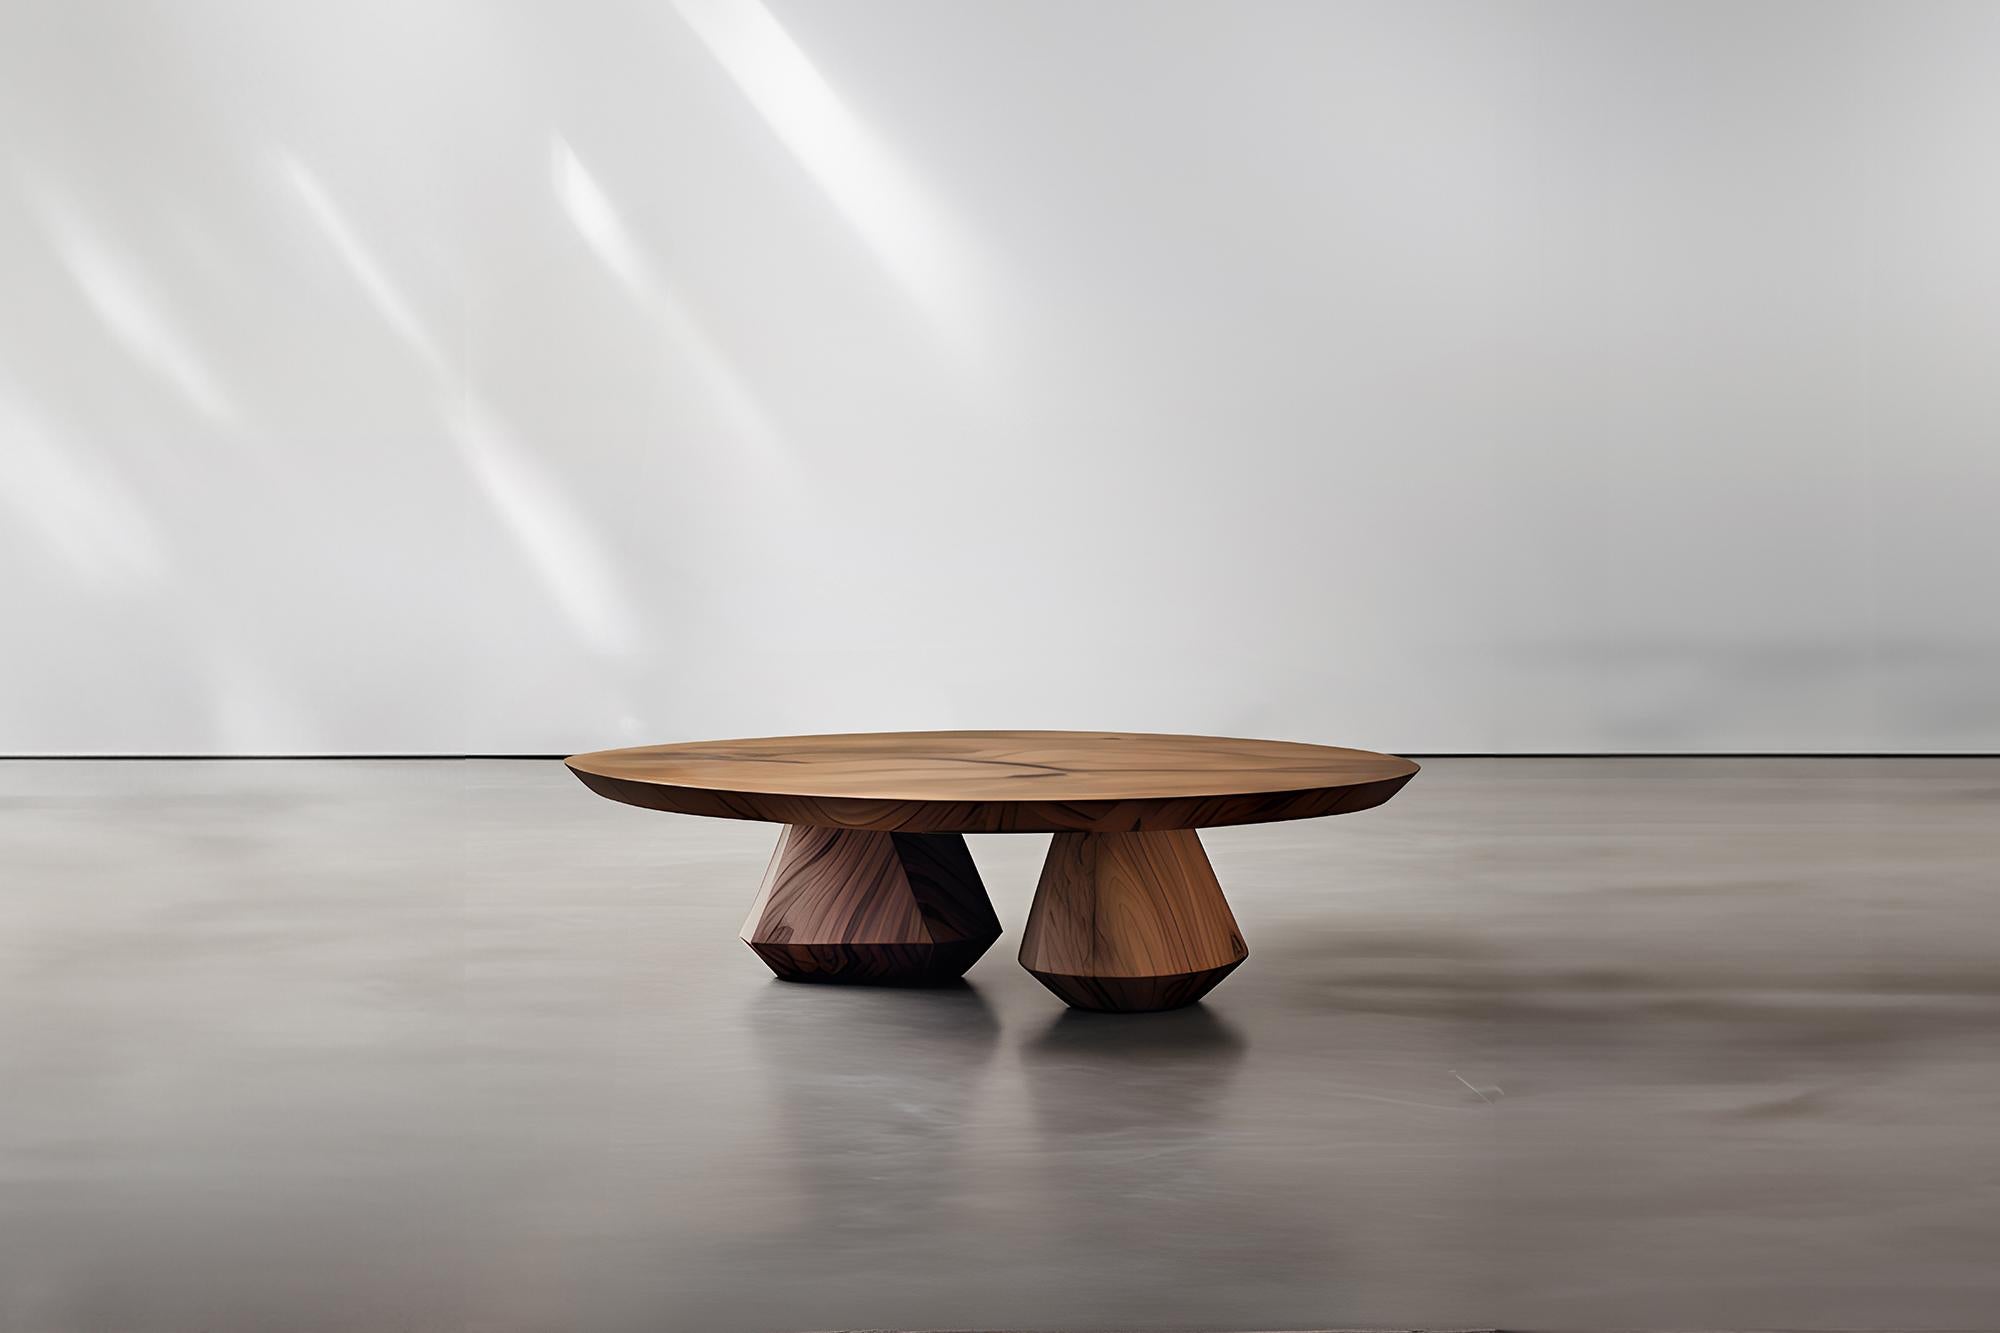 Sculptural Coffee Table Made of Solid Wood, Center Table Solace S45 by Joel Escalona


The Solace table series, designed by Joel Escalona, is a furniture collection that exudes balance and presence, thanks to its sensuous, dense, and irregular